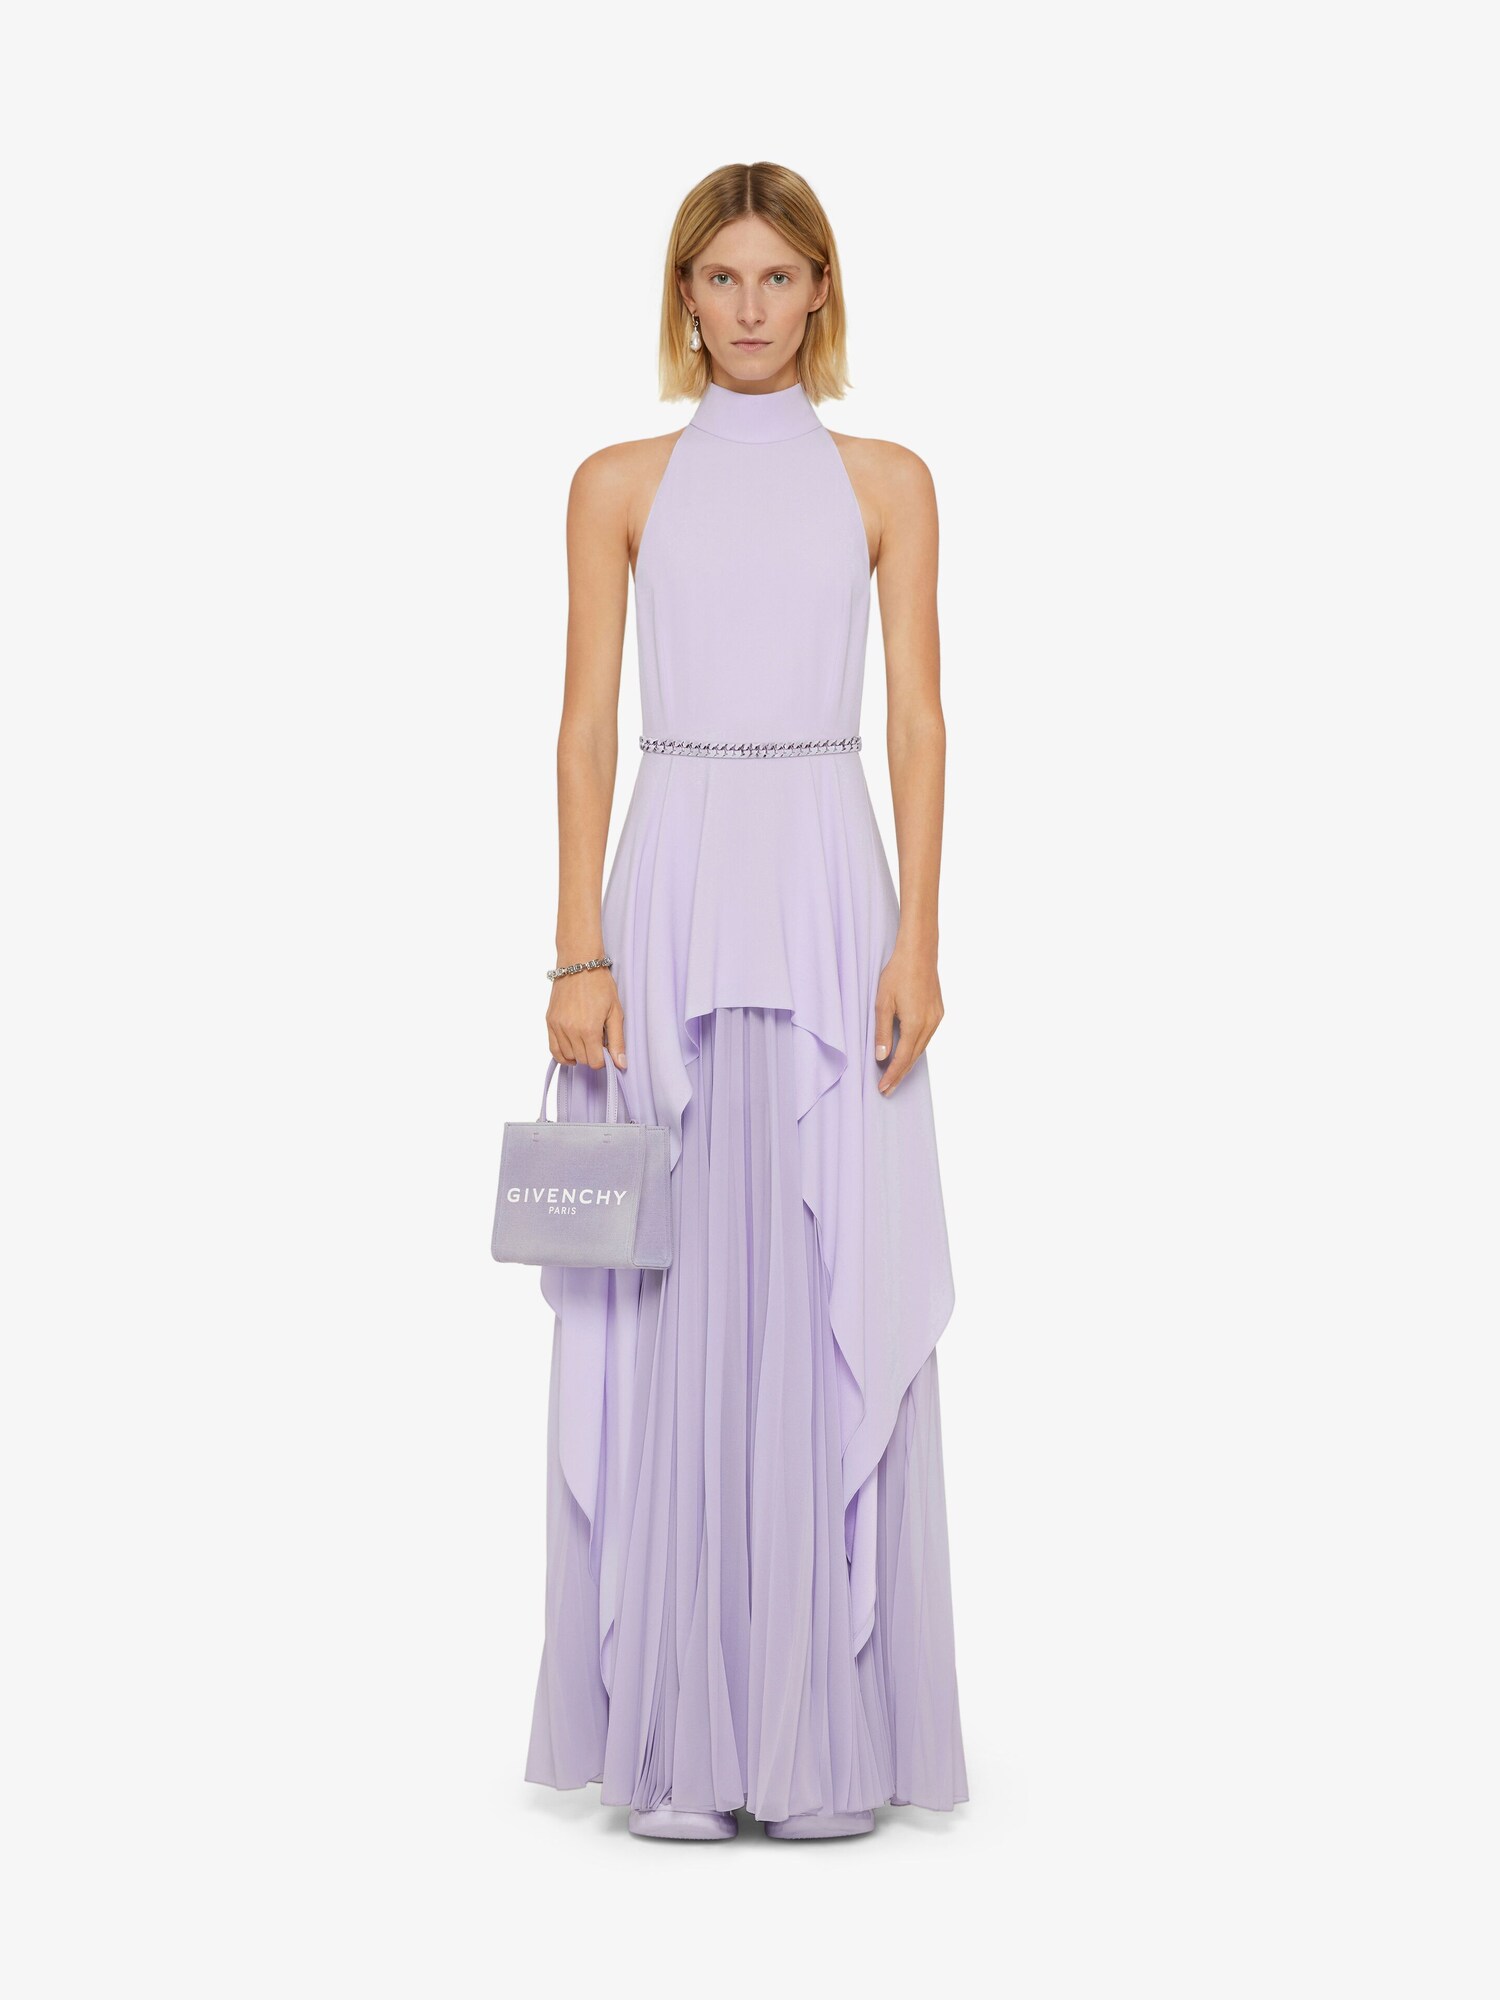 givenchy.com | Dress in crepe back satin with chain